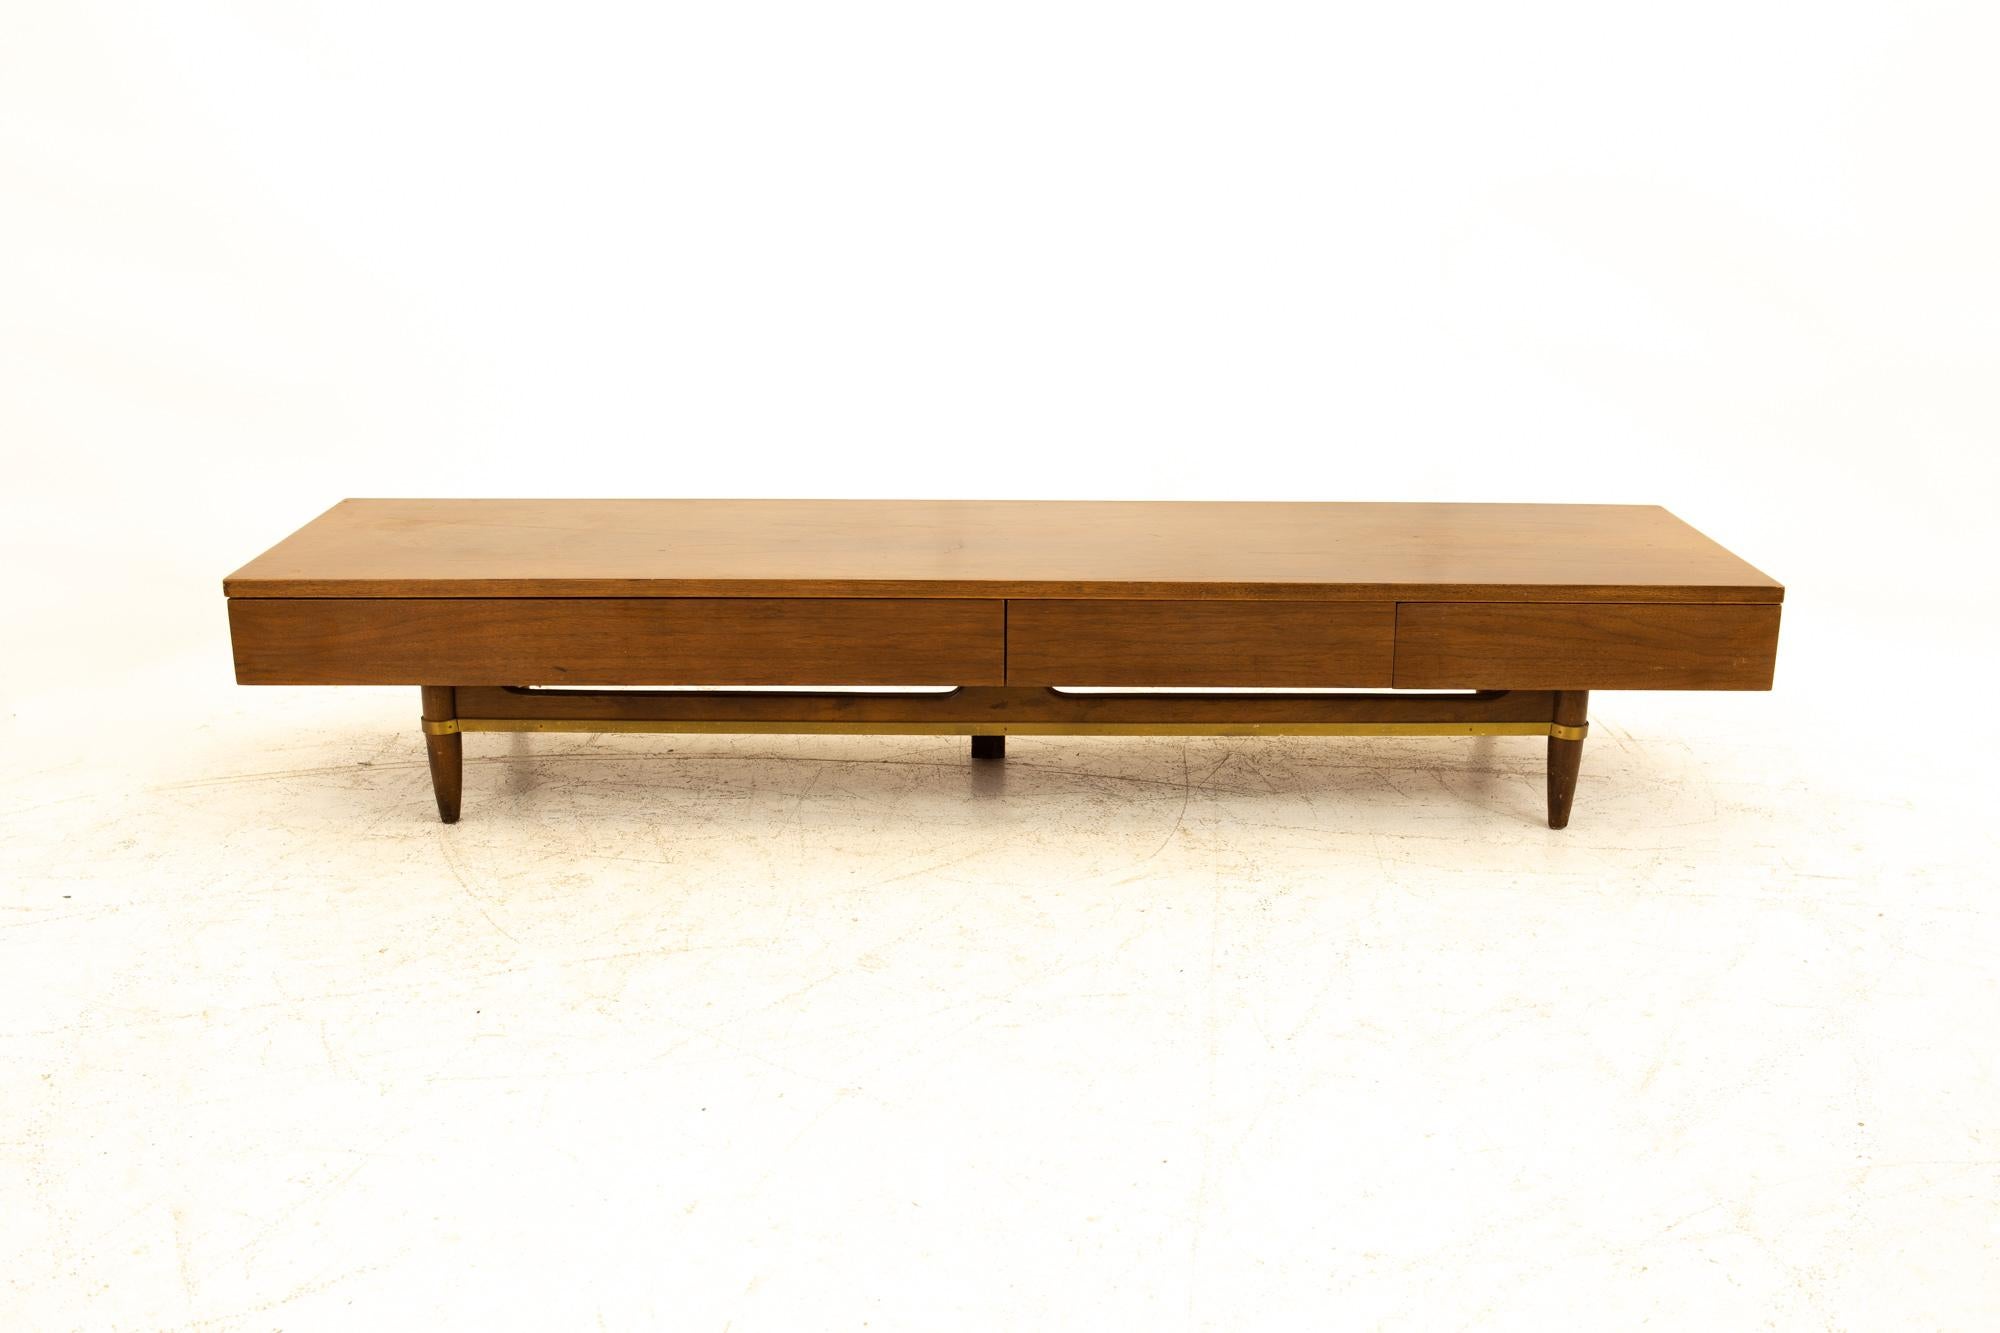 Merton Gershun for American of Martinsville Mid Century long 3-drawer walnut and brass bench
Bench measures: 72.25 wide x 18.5 deep x 12.75 high

All pieces of furniture can be had in what we call restored vintage condition. This means the piece is